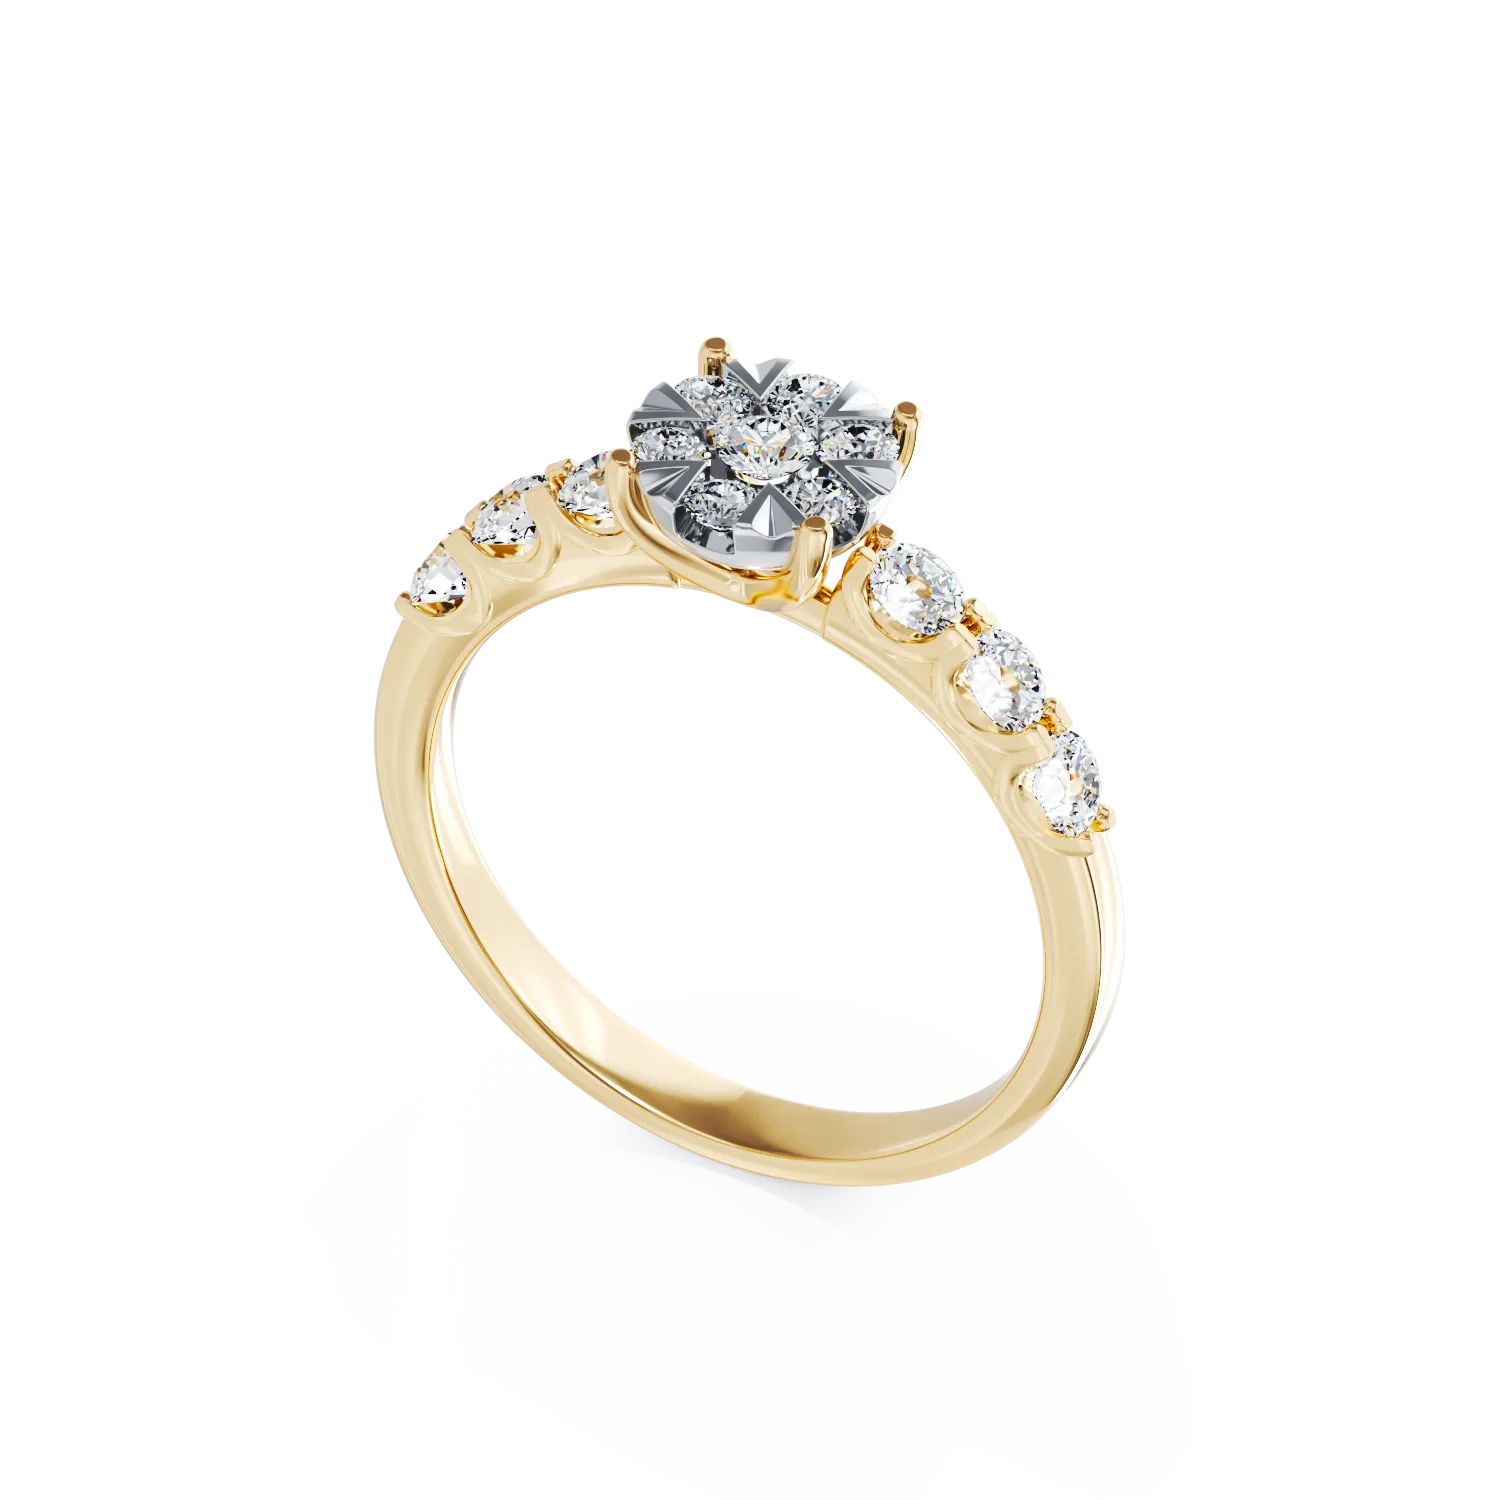 18K yellow gold engagement ring with diamonds of 0.84ct